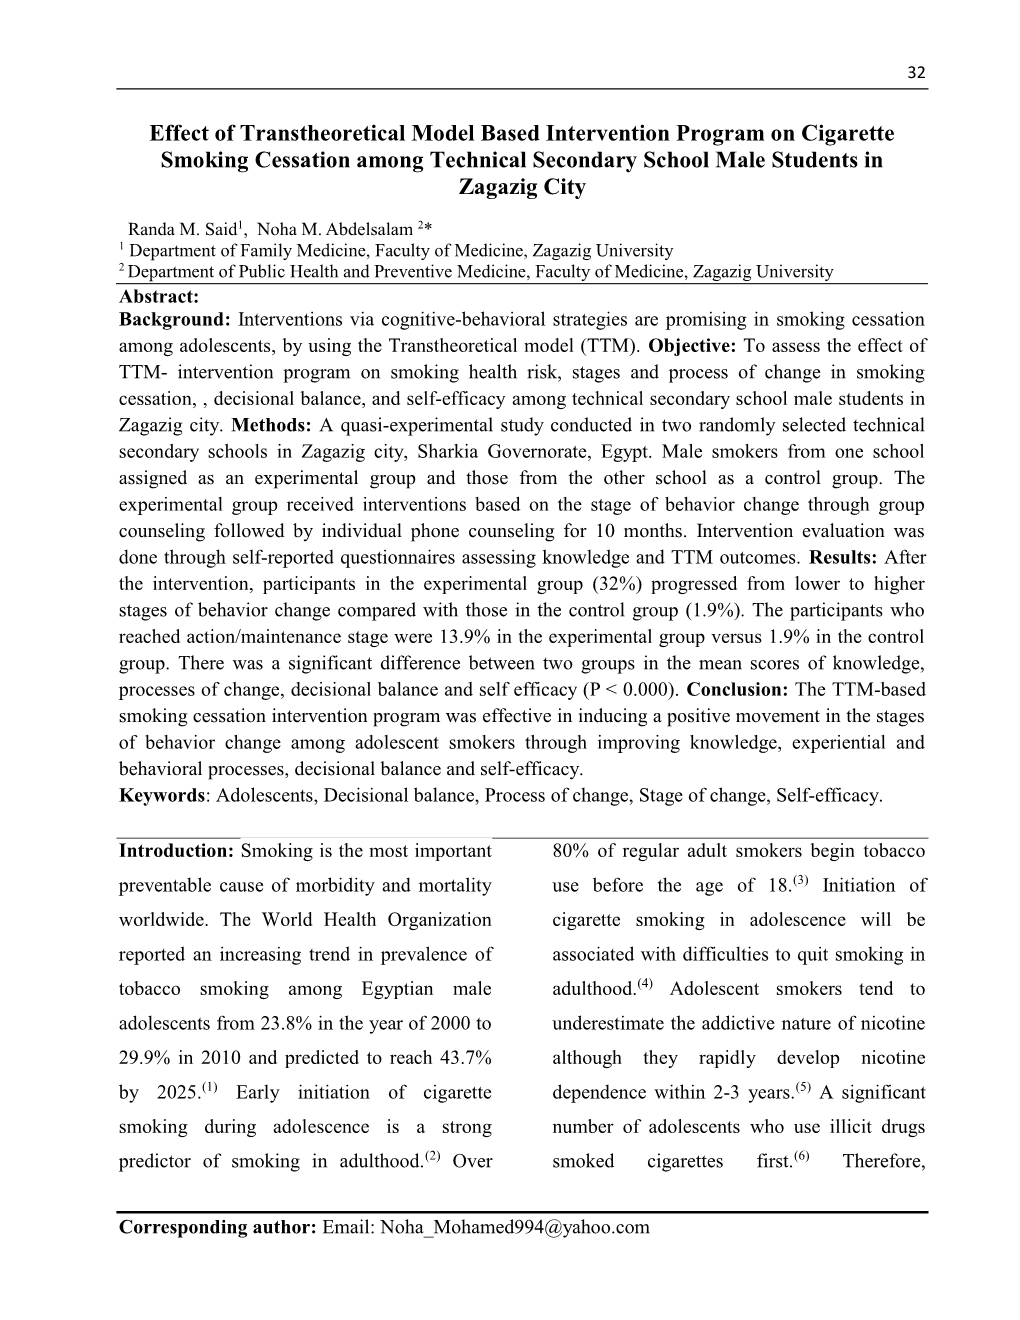 Effect of Transtheoretical Model Based Intervention Program on Cigarette Smoking Cessation Among Technical Secondary School Male Students in Zagazig City